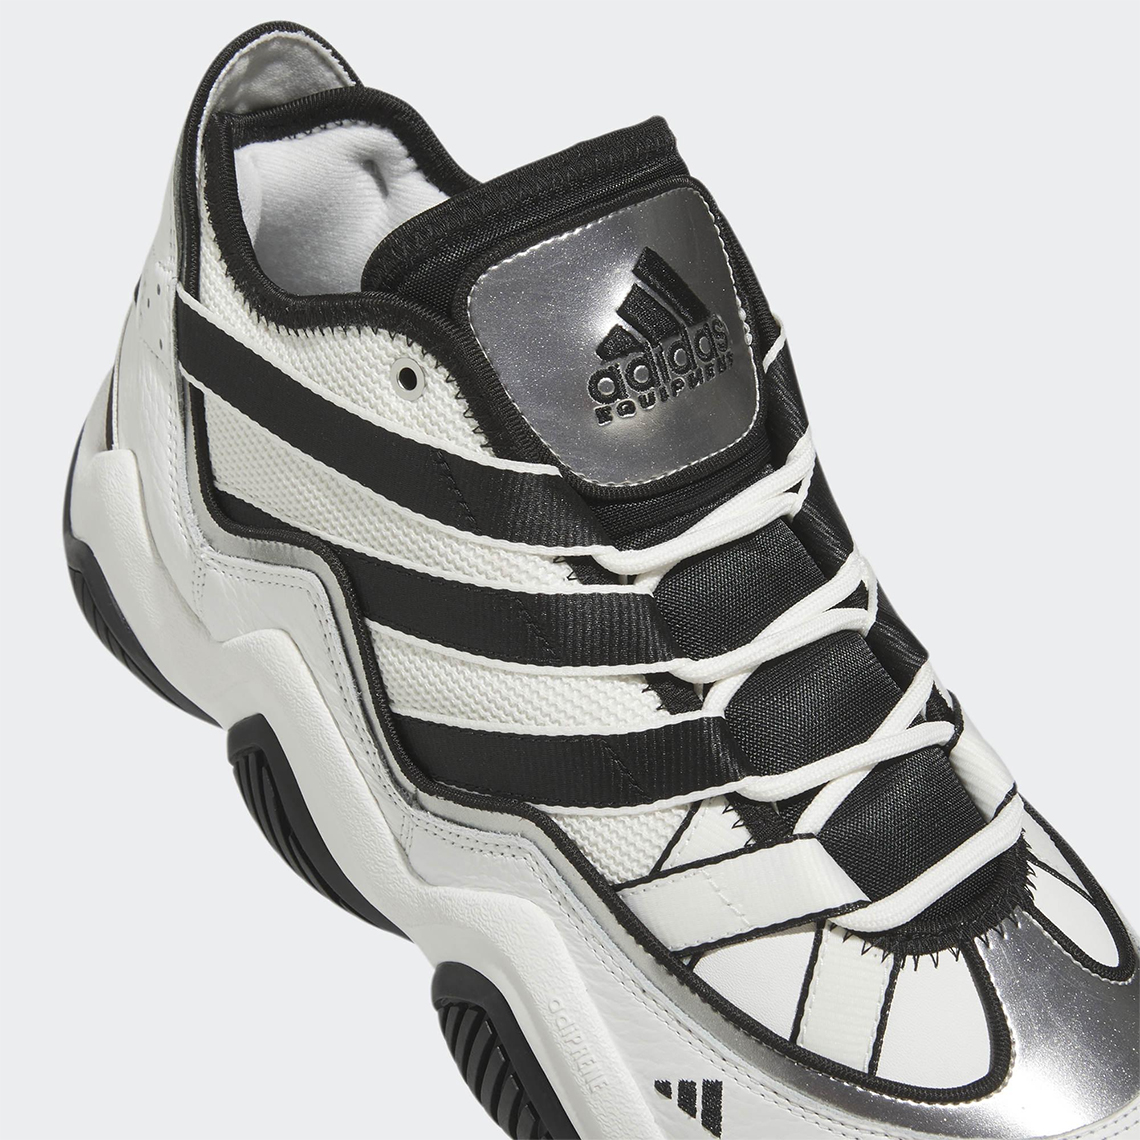 adidas Is Officially Bringing Back The Top Ten 2010 - Sneaker News